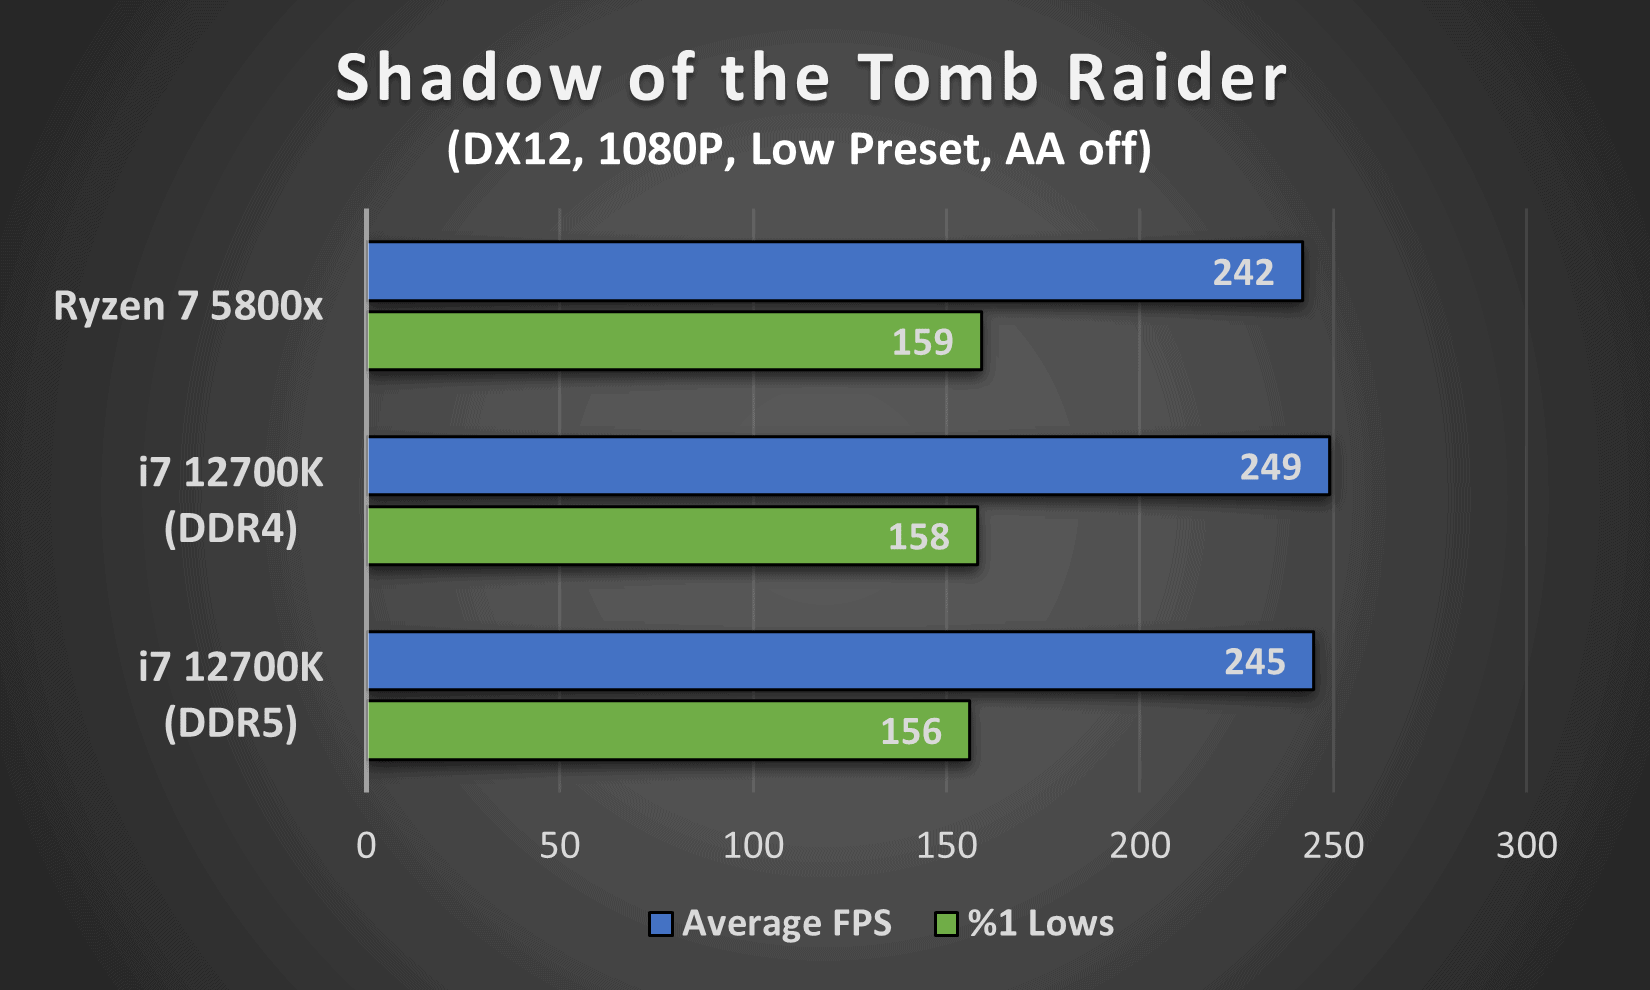 Shadow of the Tomb Raider performance comparison between Intel's i7 12700K (DDR4 and DDR5) and AMD's Ryzen 7 5800x